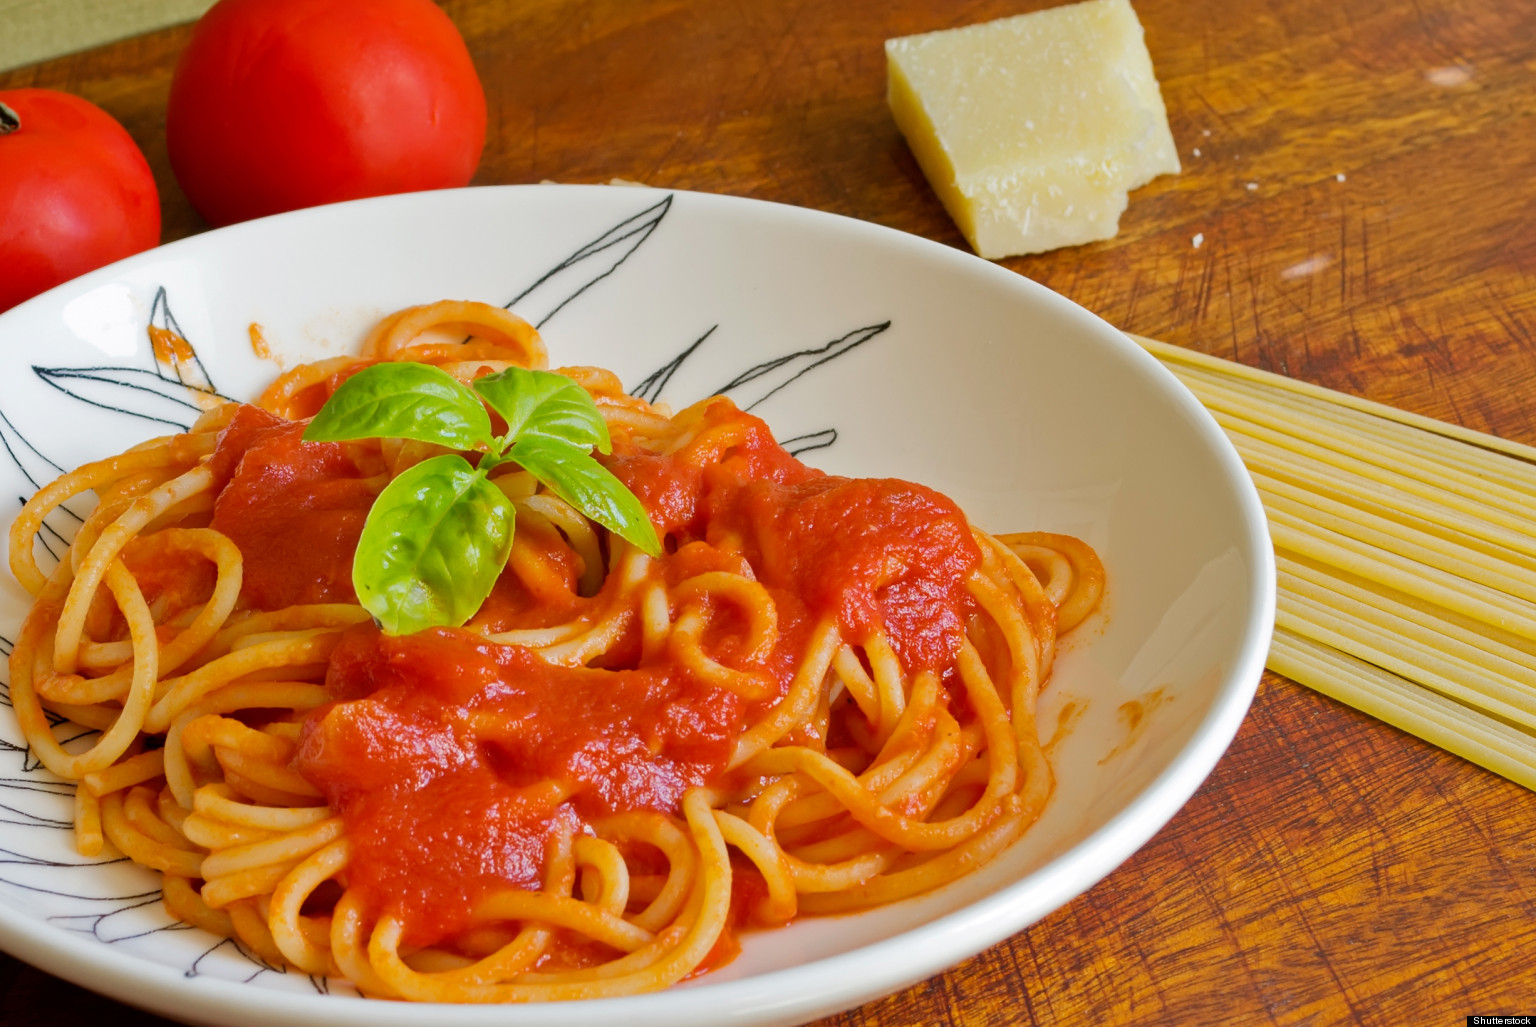 Italian Food Survey: Favorite Pastas, Is Home Cooking Better? | HuffPost